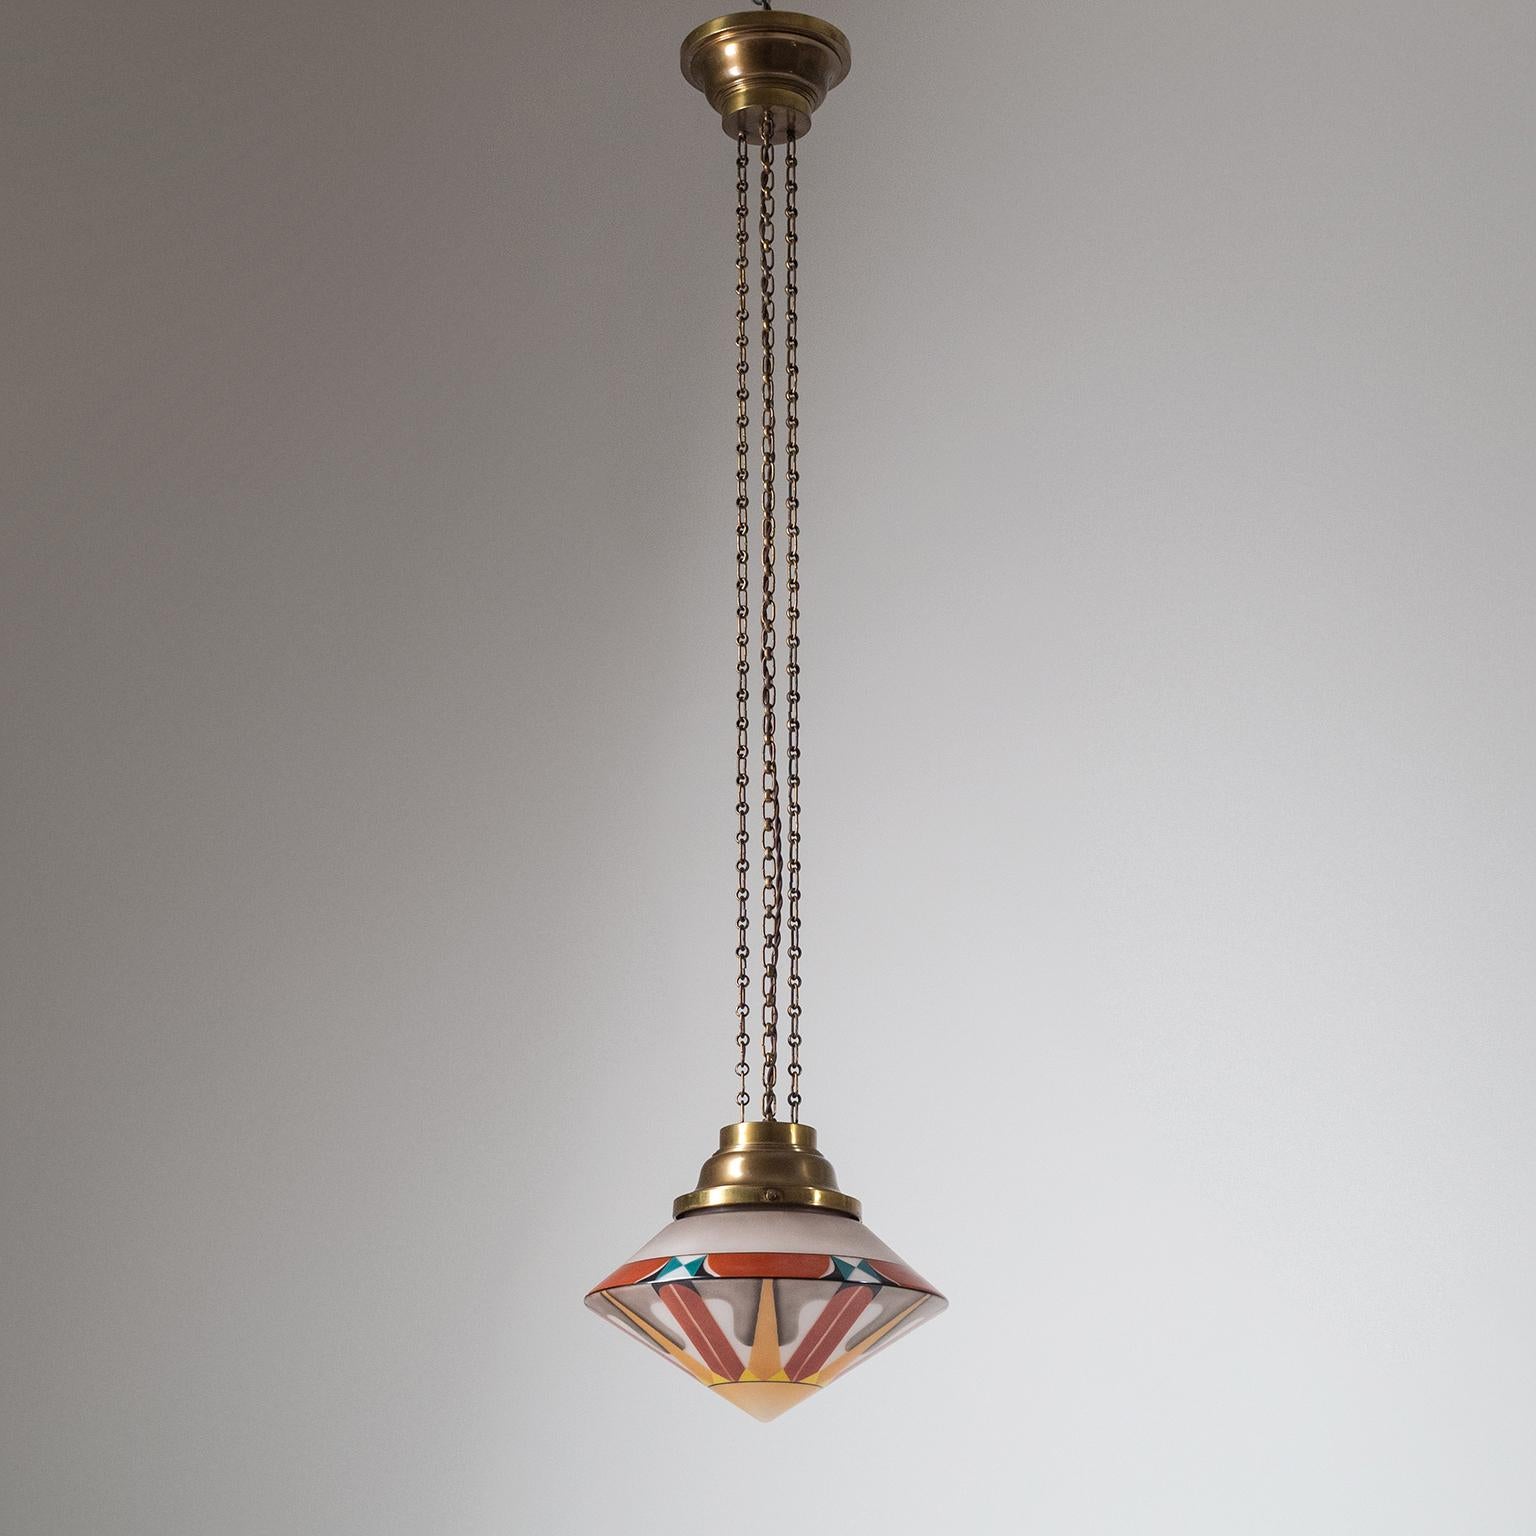 Rare Art Deco suspension light from the 1920s. Large conical blown glass diffuser with a satin finish and multi-color enameled geometric decor. The hardware is entirely in brass with three long chains and symetrical canopy and glass holder. Very